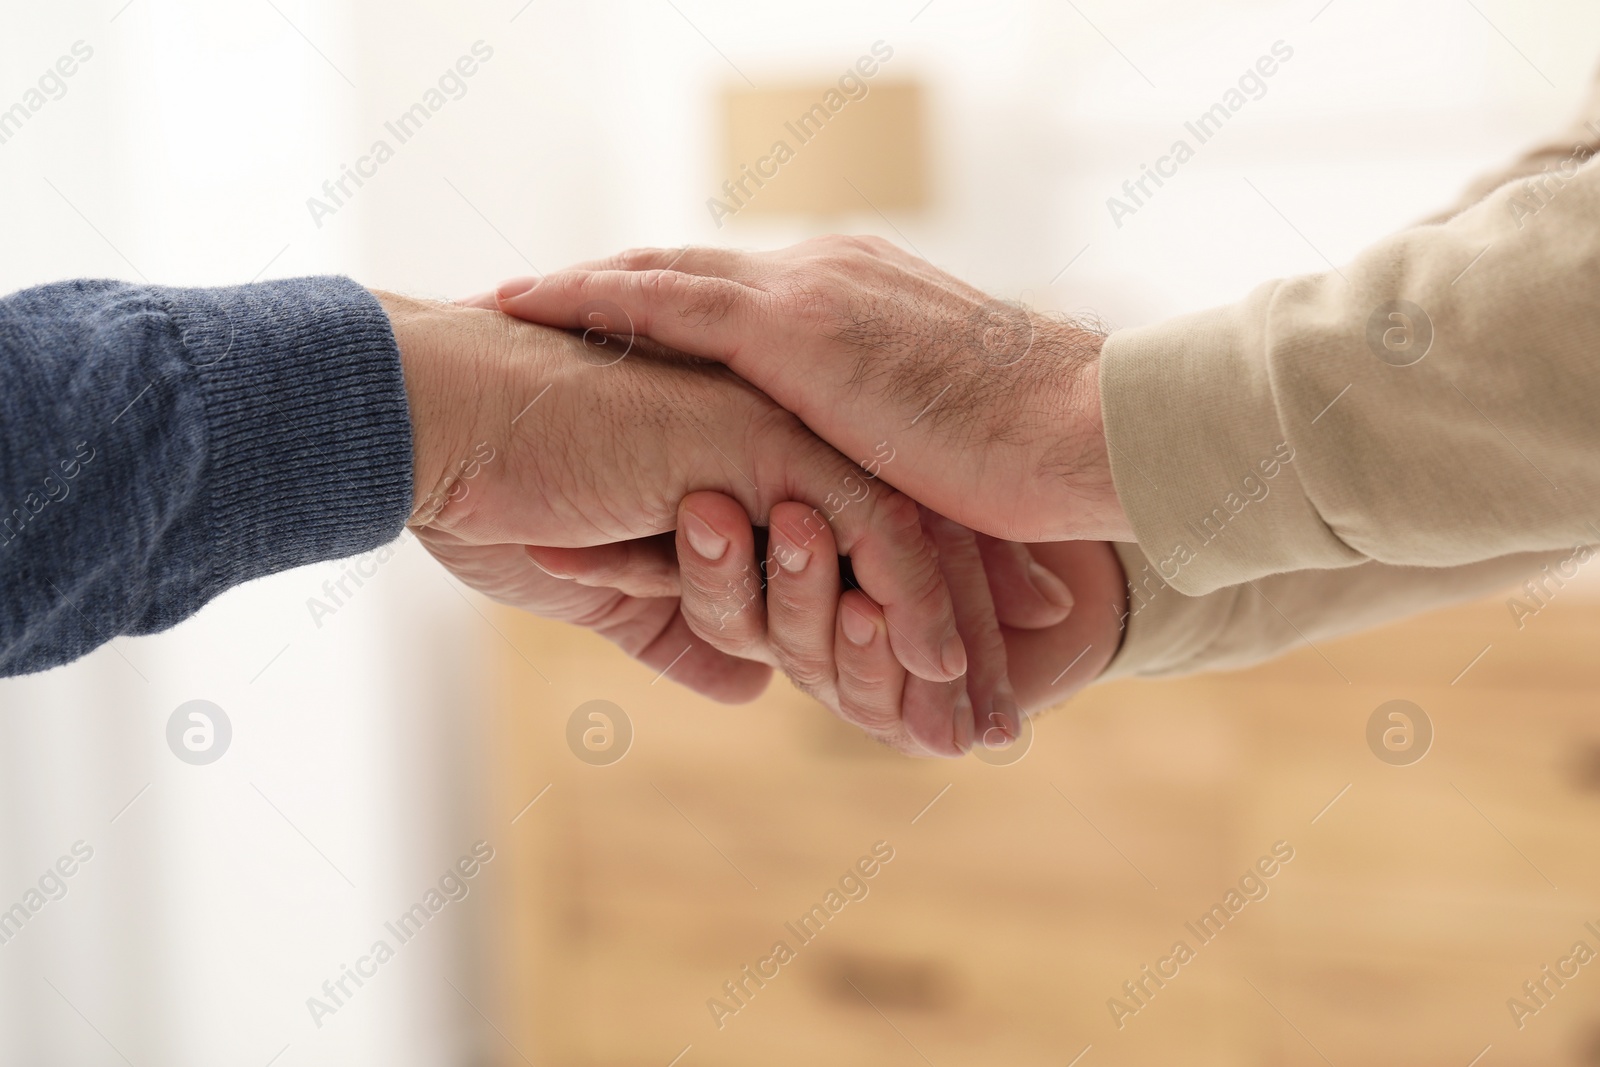 Photo of Trust and deal. Men joining hands indoors, closeup